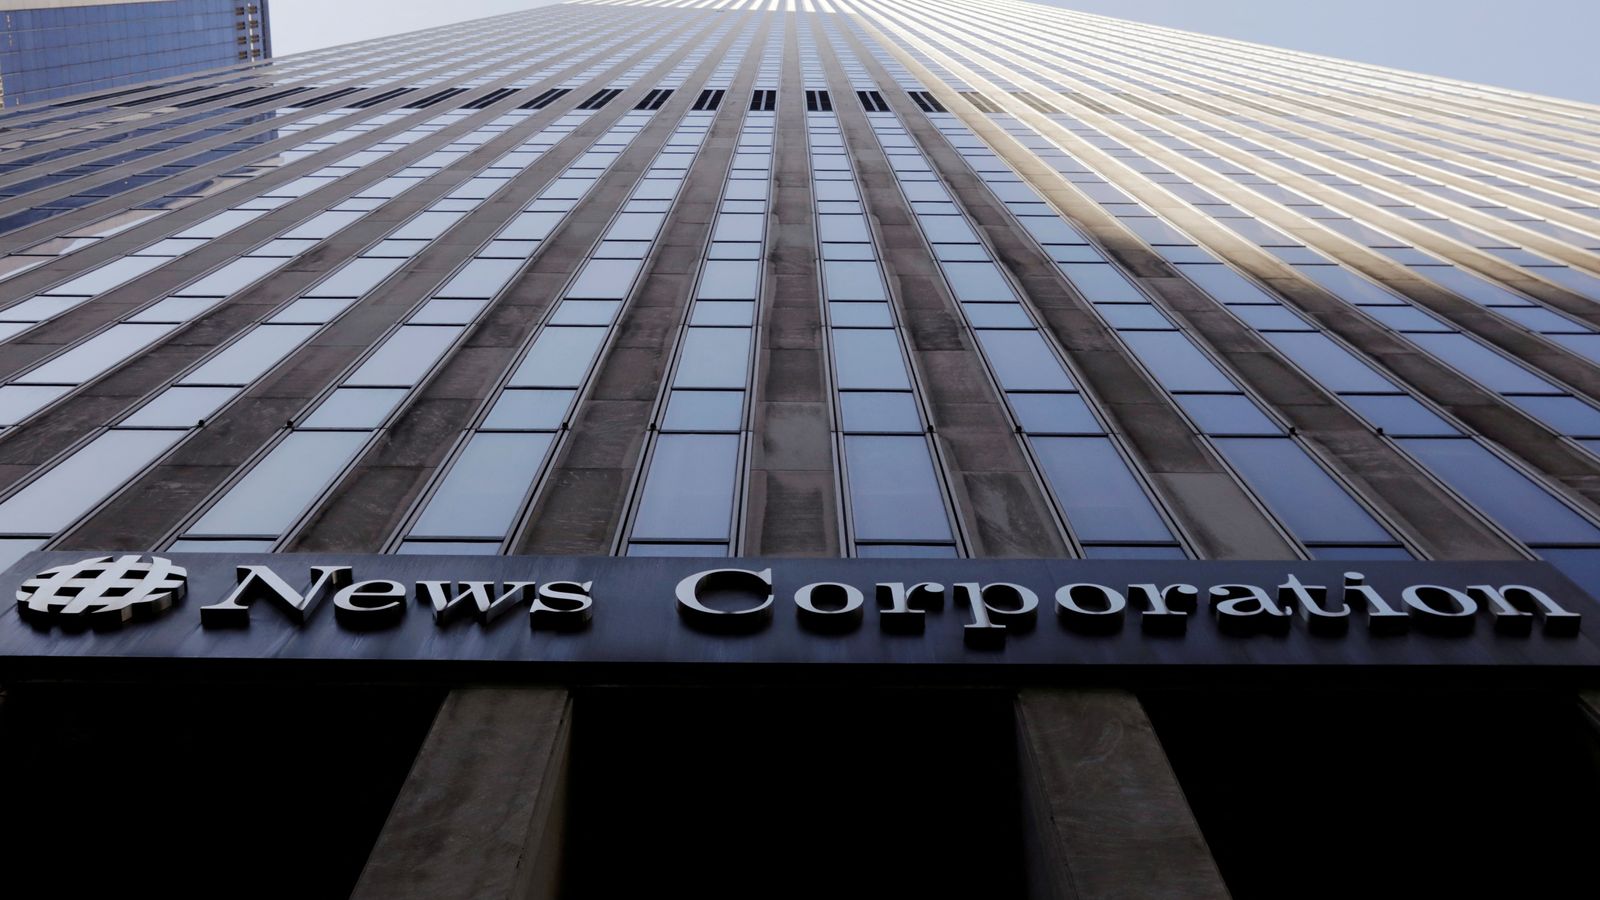 Rupert Murdoch's News Corp hacked in cyber attack believed to be linked to China